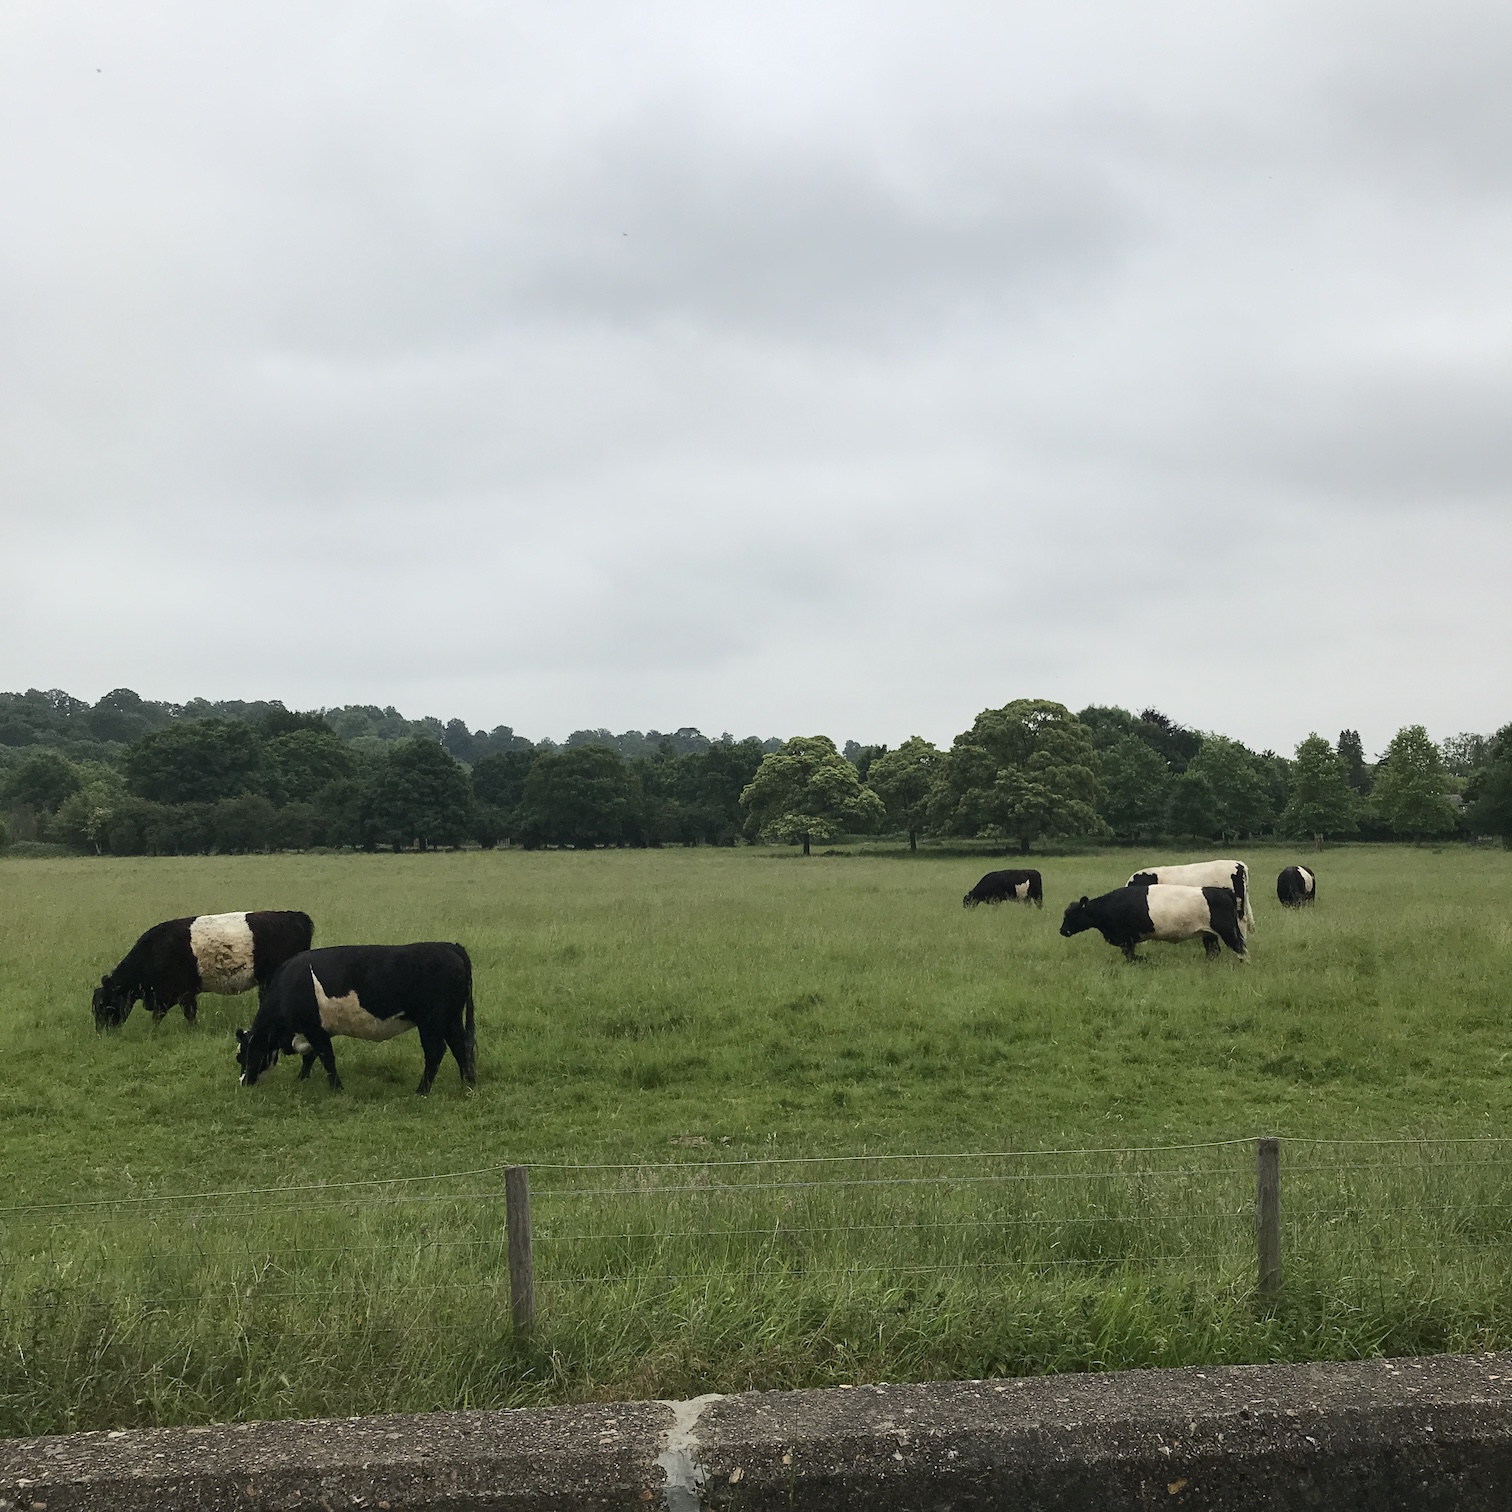 Iconic by most accounts Petersham Meadows cows grazing on a summer day (2022)